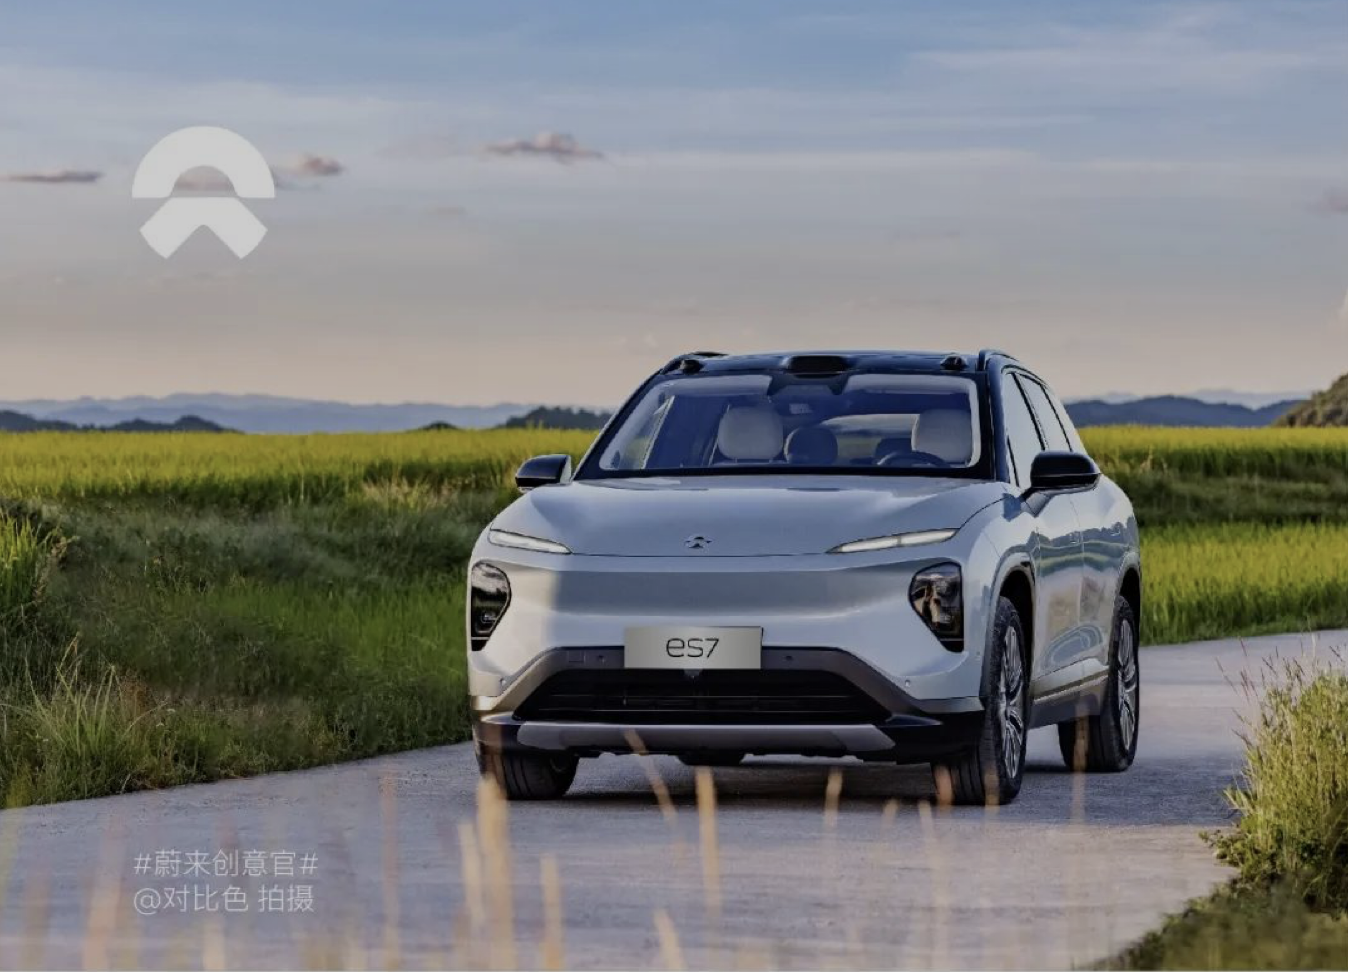 NIO announces delivery volume: 8,506 new vehicles delivered in January.